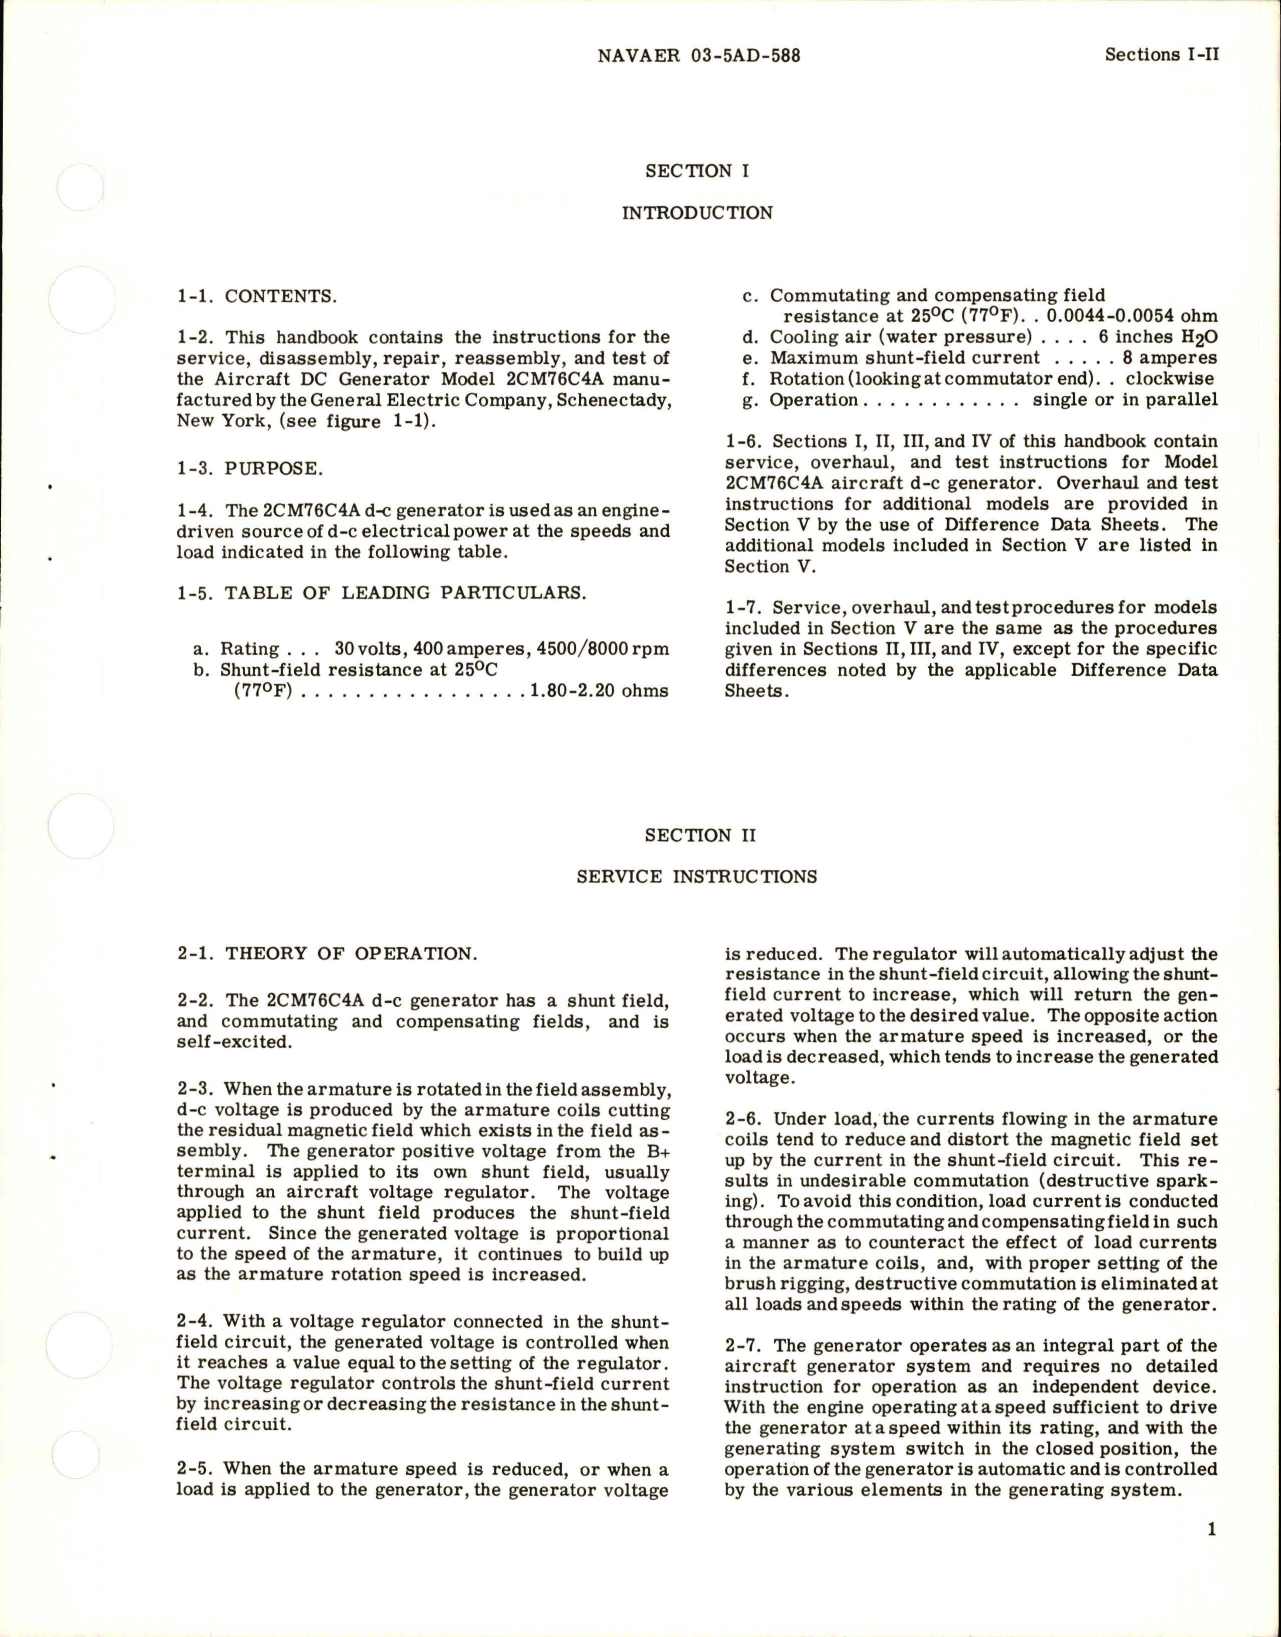 Sample page 5 from AirCorps Library document: Service and Overhaul Instructions for DC Generator - Models 2CM76C4, 2CM76C4A, 2CM76E4, 2CM76E4C, and 2CM76E5 